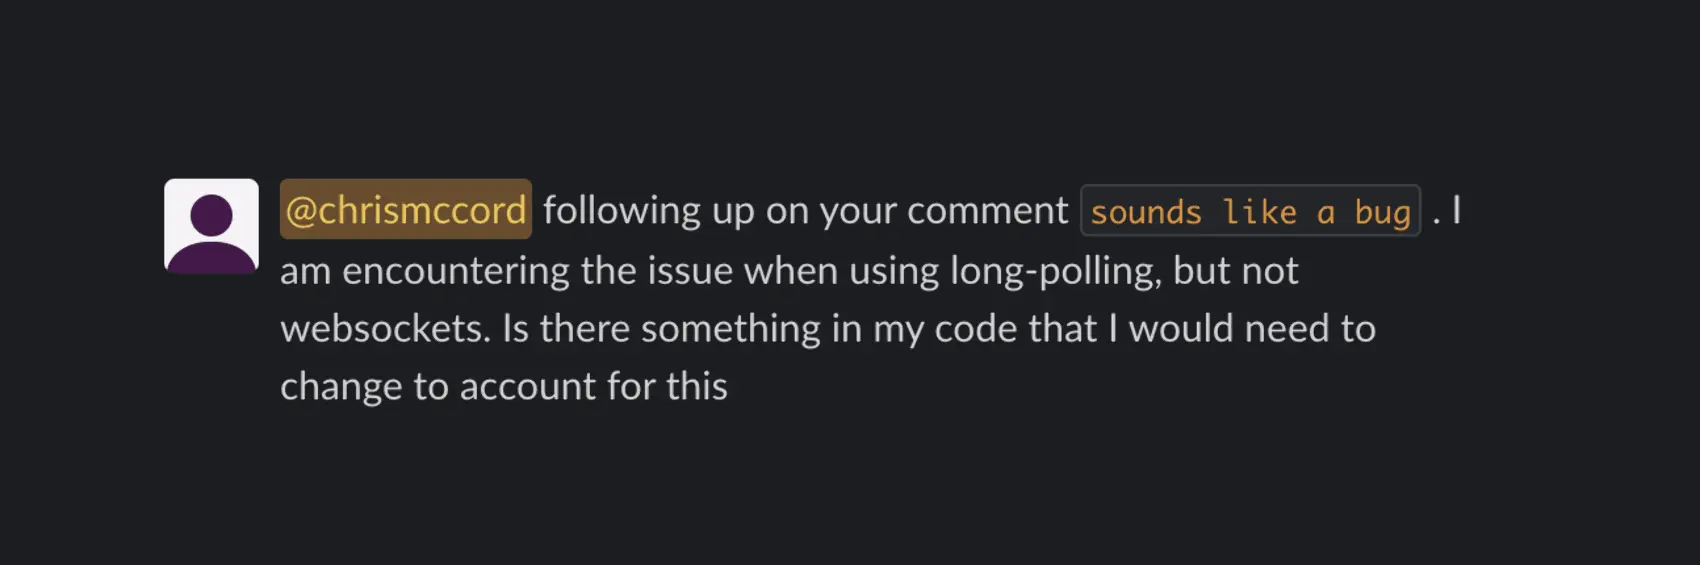 @chrismccord following up on your comment "sounds like a bug". I am encountering the issue when using long-polling, but not websockets. Is there something in my code that I would need to change to account for this?